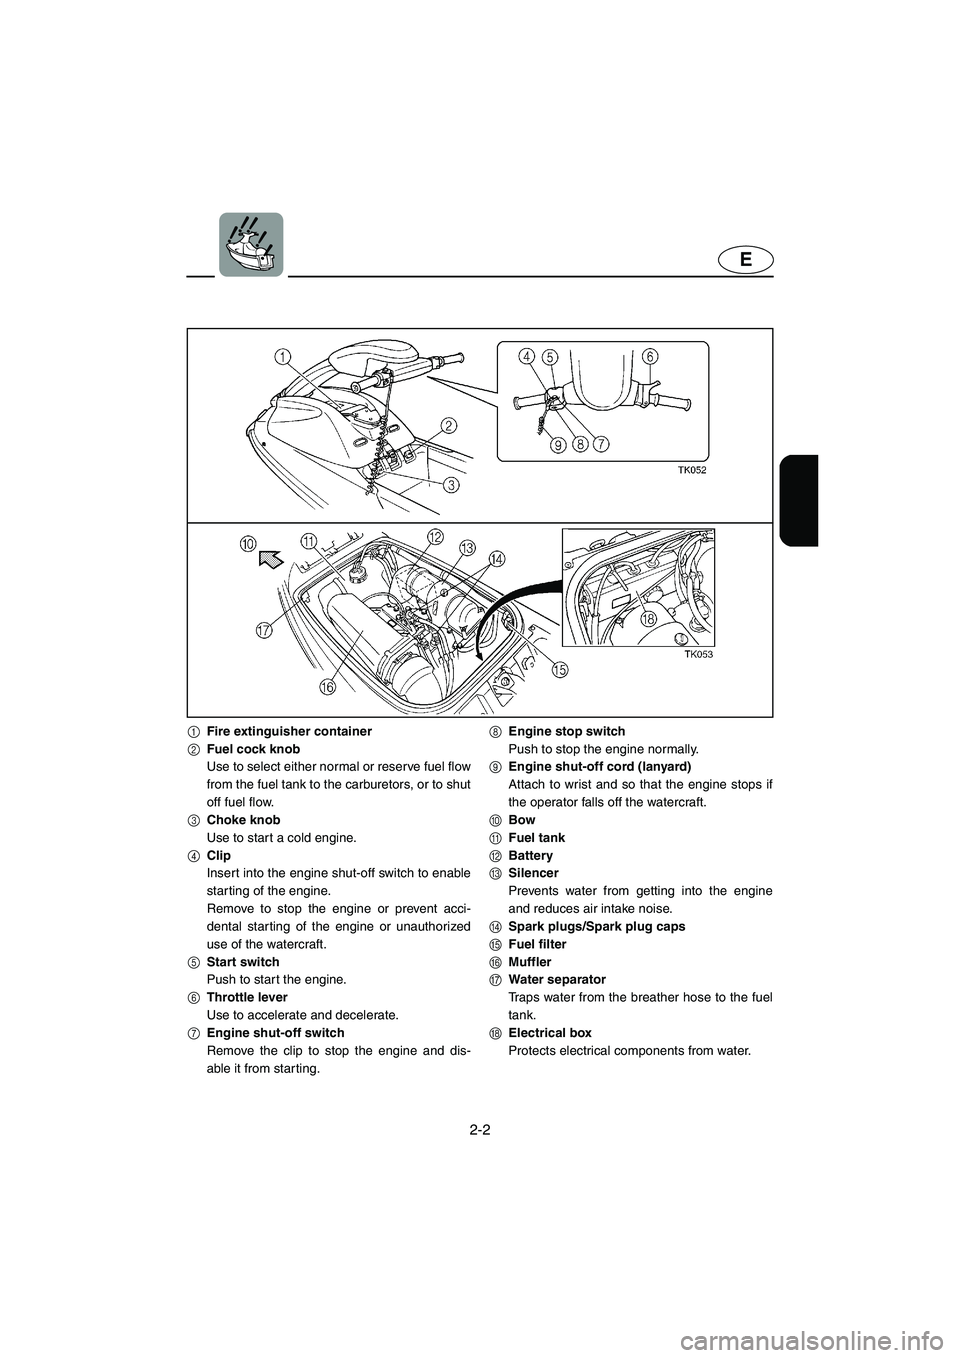 YAMAHA SUPERJET 2002  Owners Manual 2-2
E
1Fire extinguisher container
2Fuel cock knob
Use to select either normal or reserve fuel flow
from the fuel tank to the carburetors, or to shut
off fuel flow.
3Choke knob
Use to start a cold eng